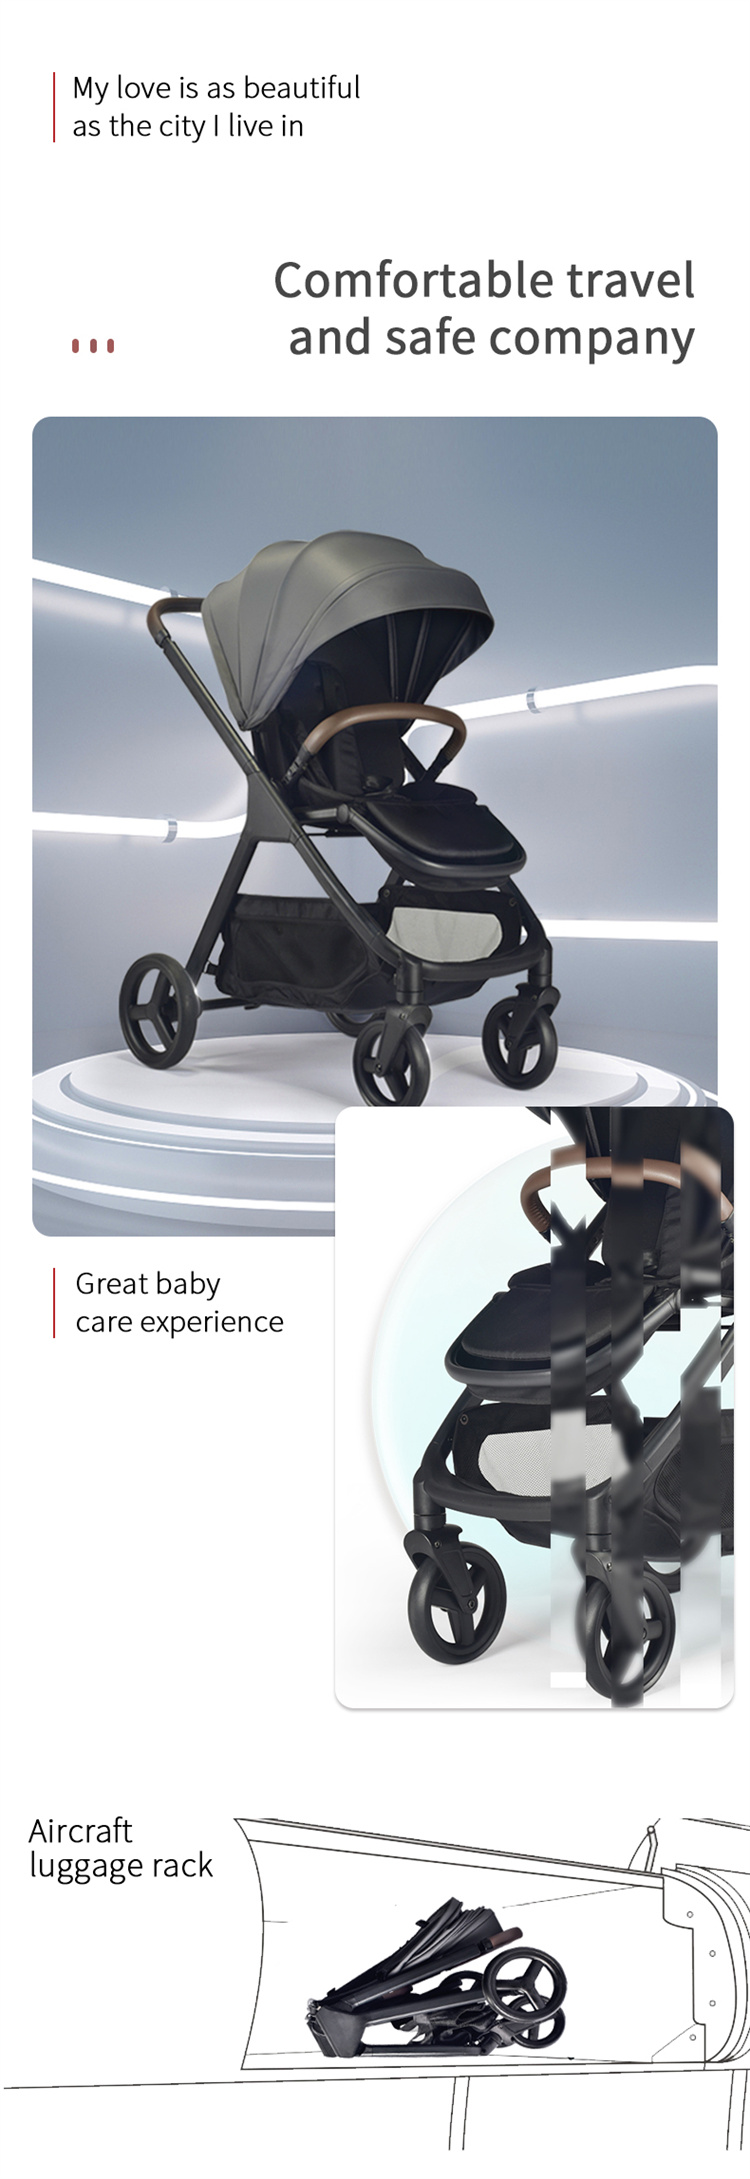 FENGRI Collapsible portable stroller